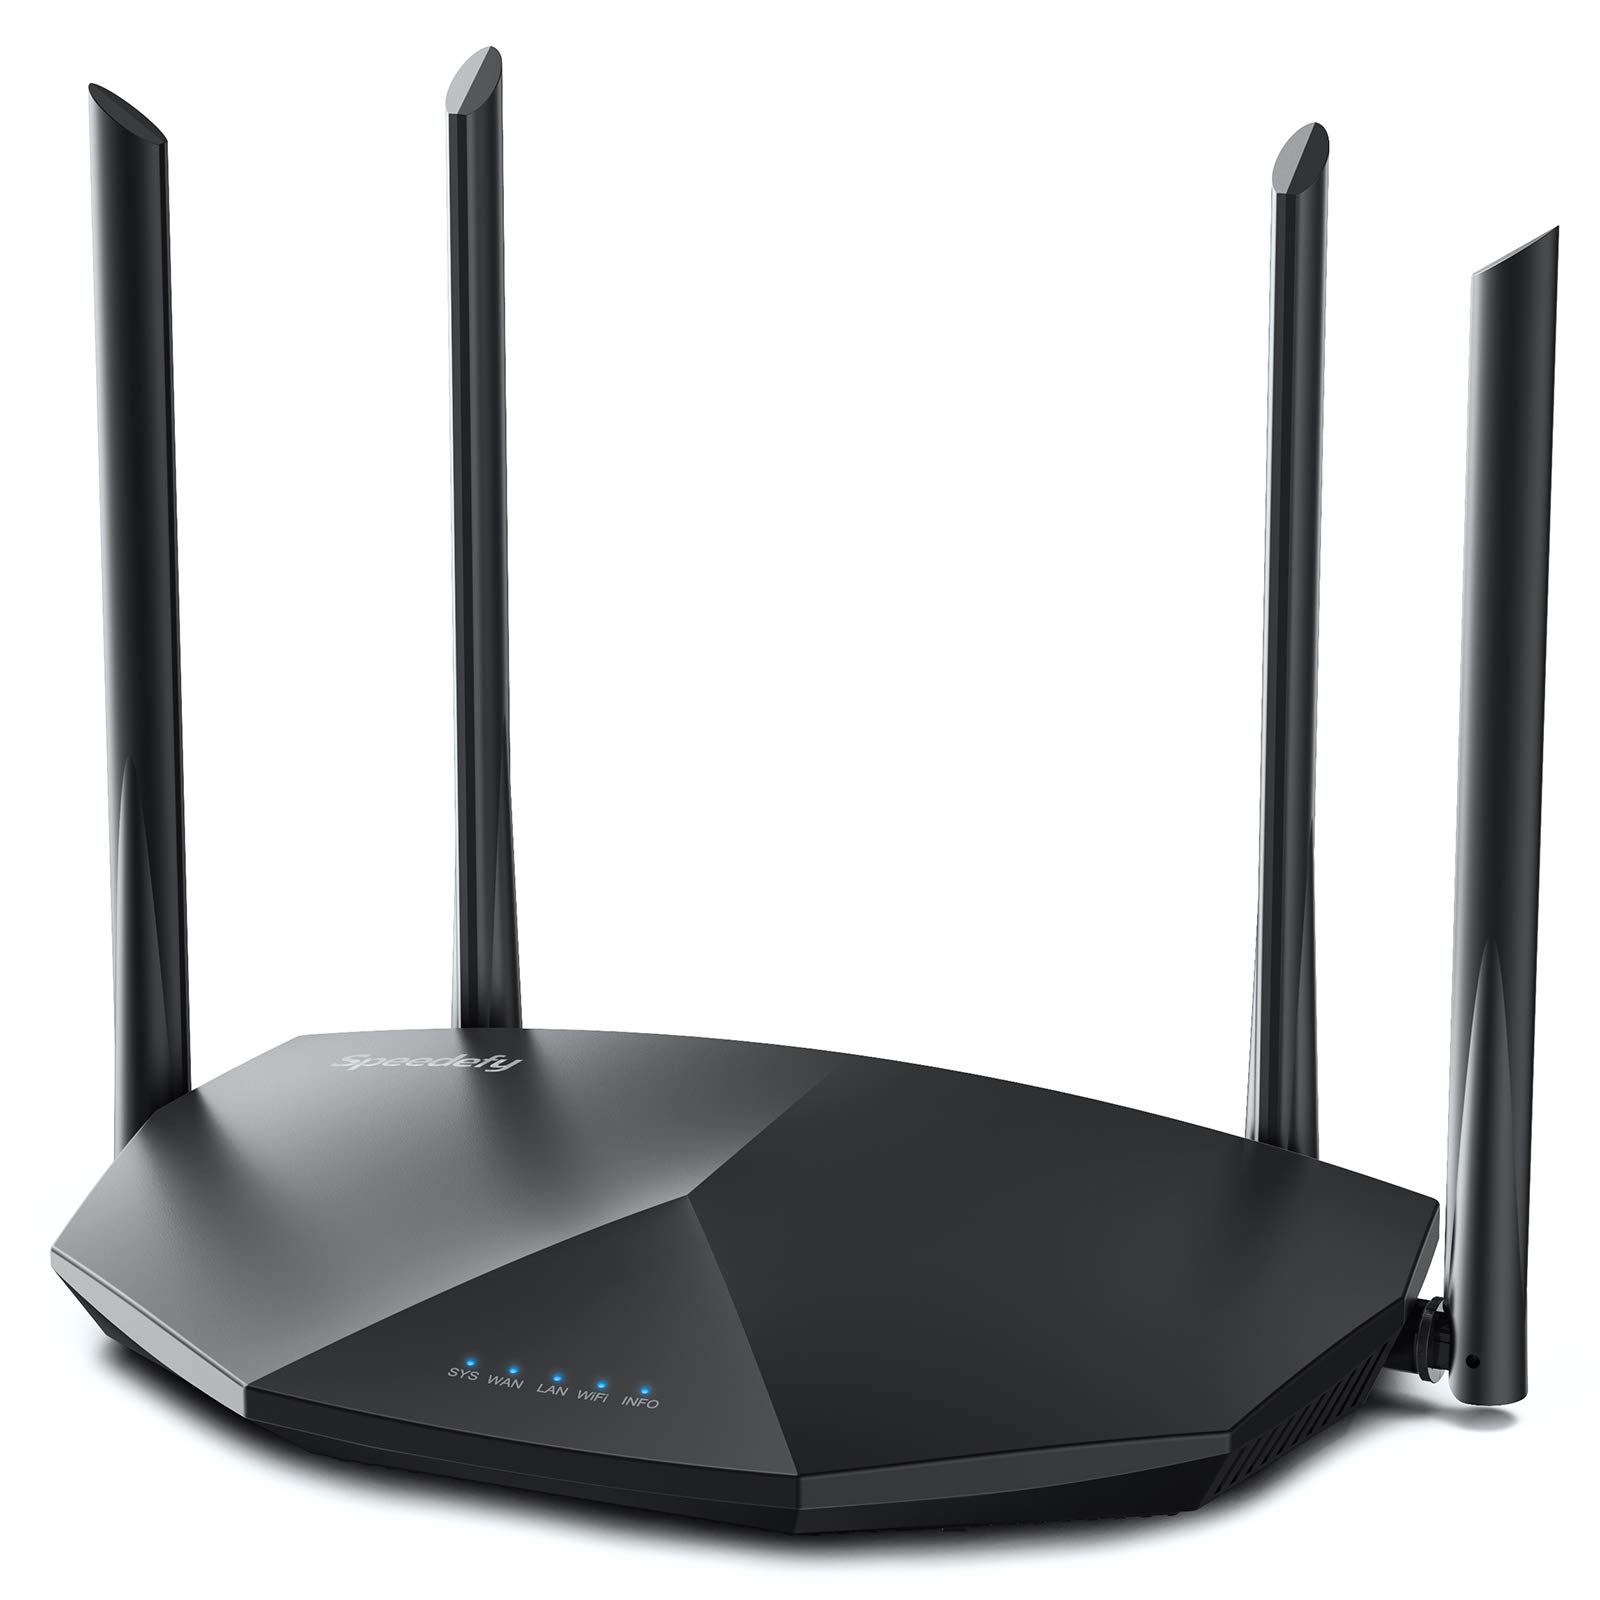 Speedefy High Speed Pro WiFi Router - Dual Band AC2100 Wireless Router for Streaming & Gaming, Up to 35 Devices, 2000 sq.ft Coverage, 4X4 MU-MIMO, USB Port, Parental Cont - $60